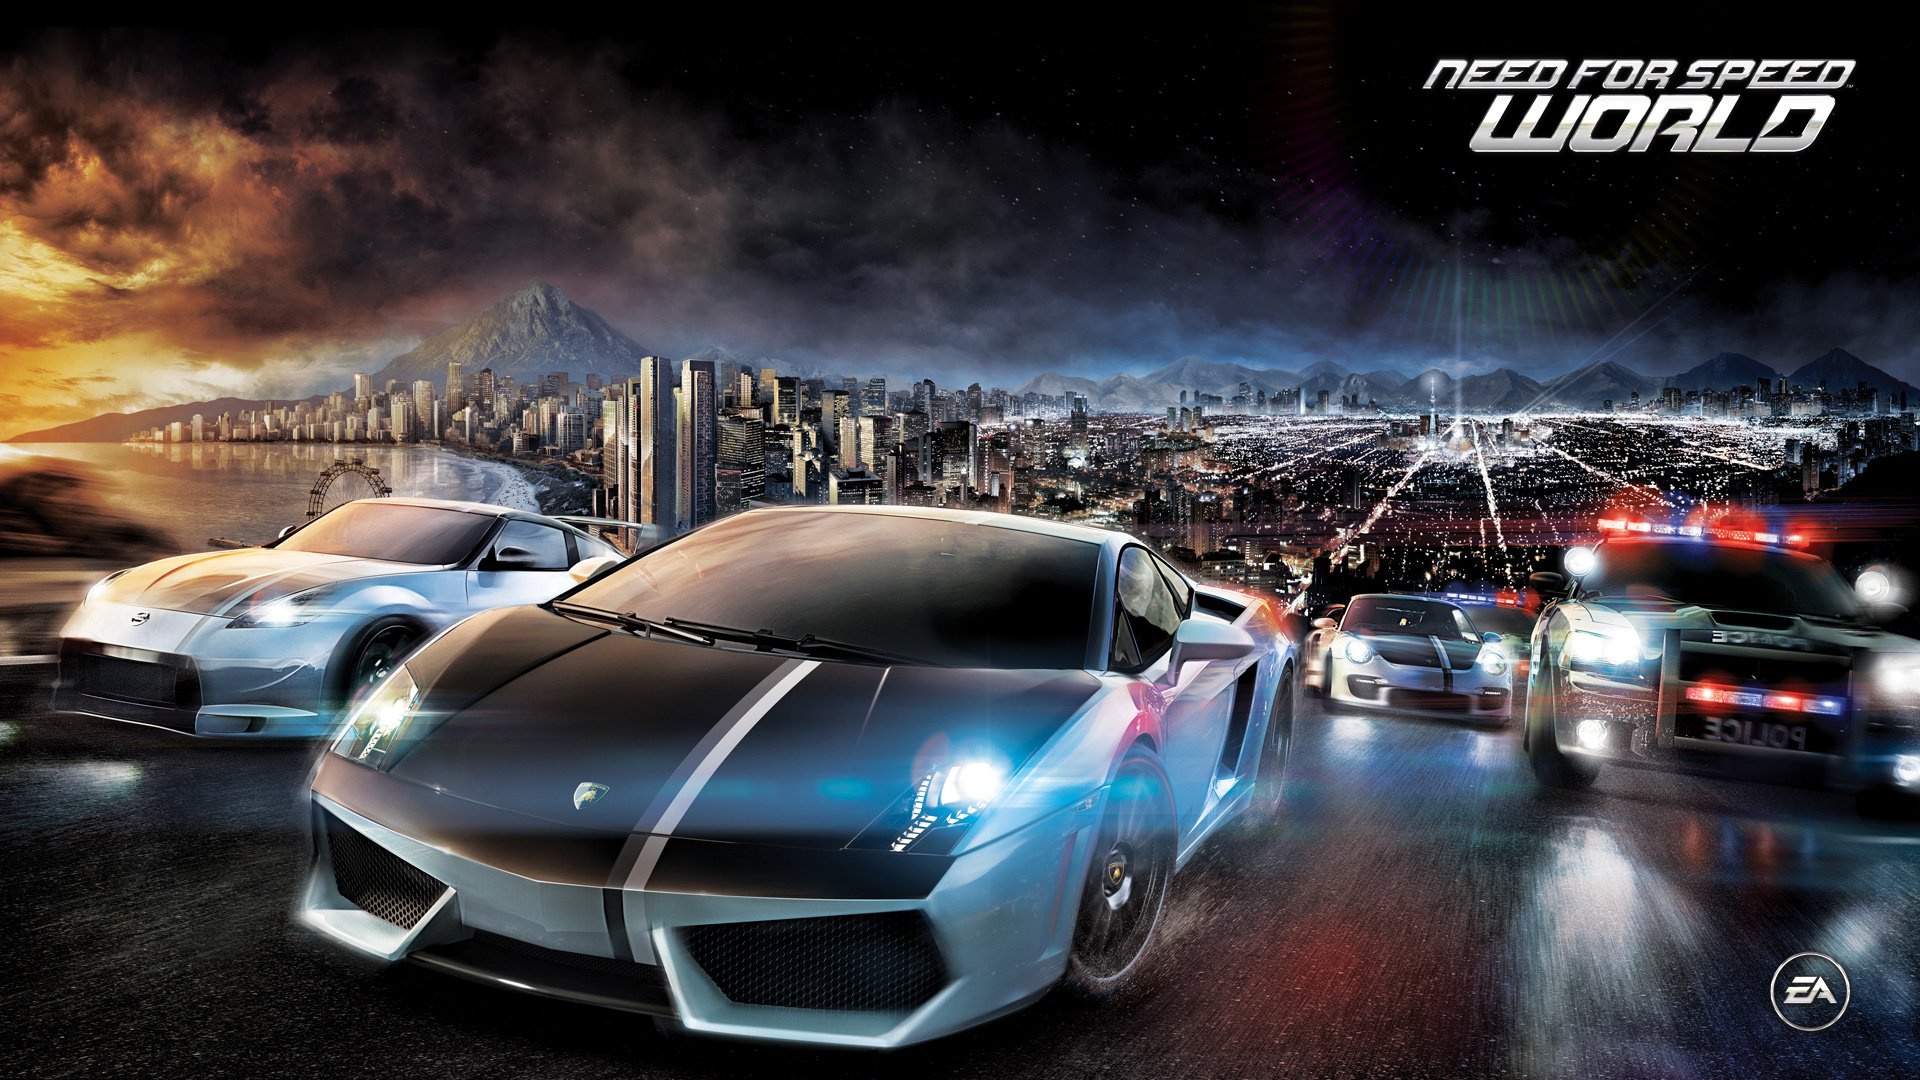 Need For Speed Wallpaper Hd 1920x1080